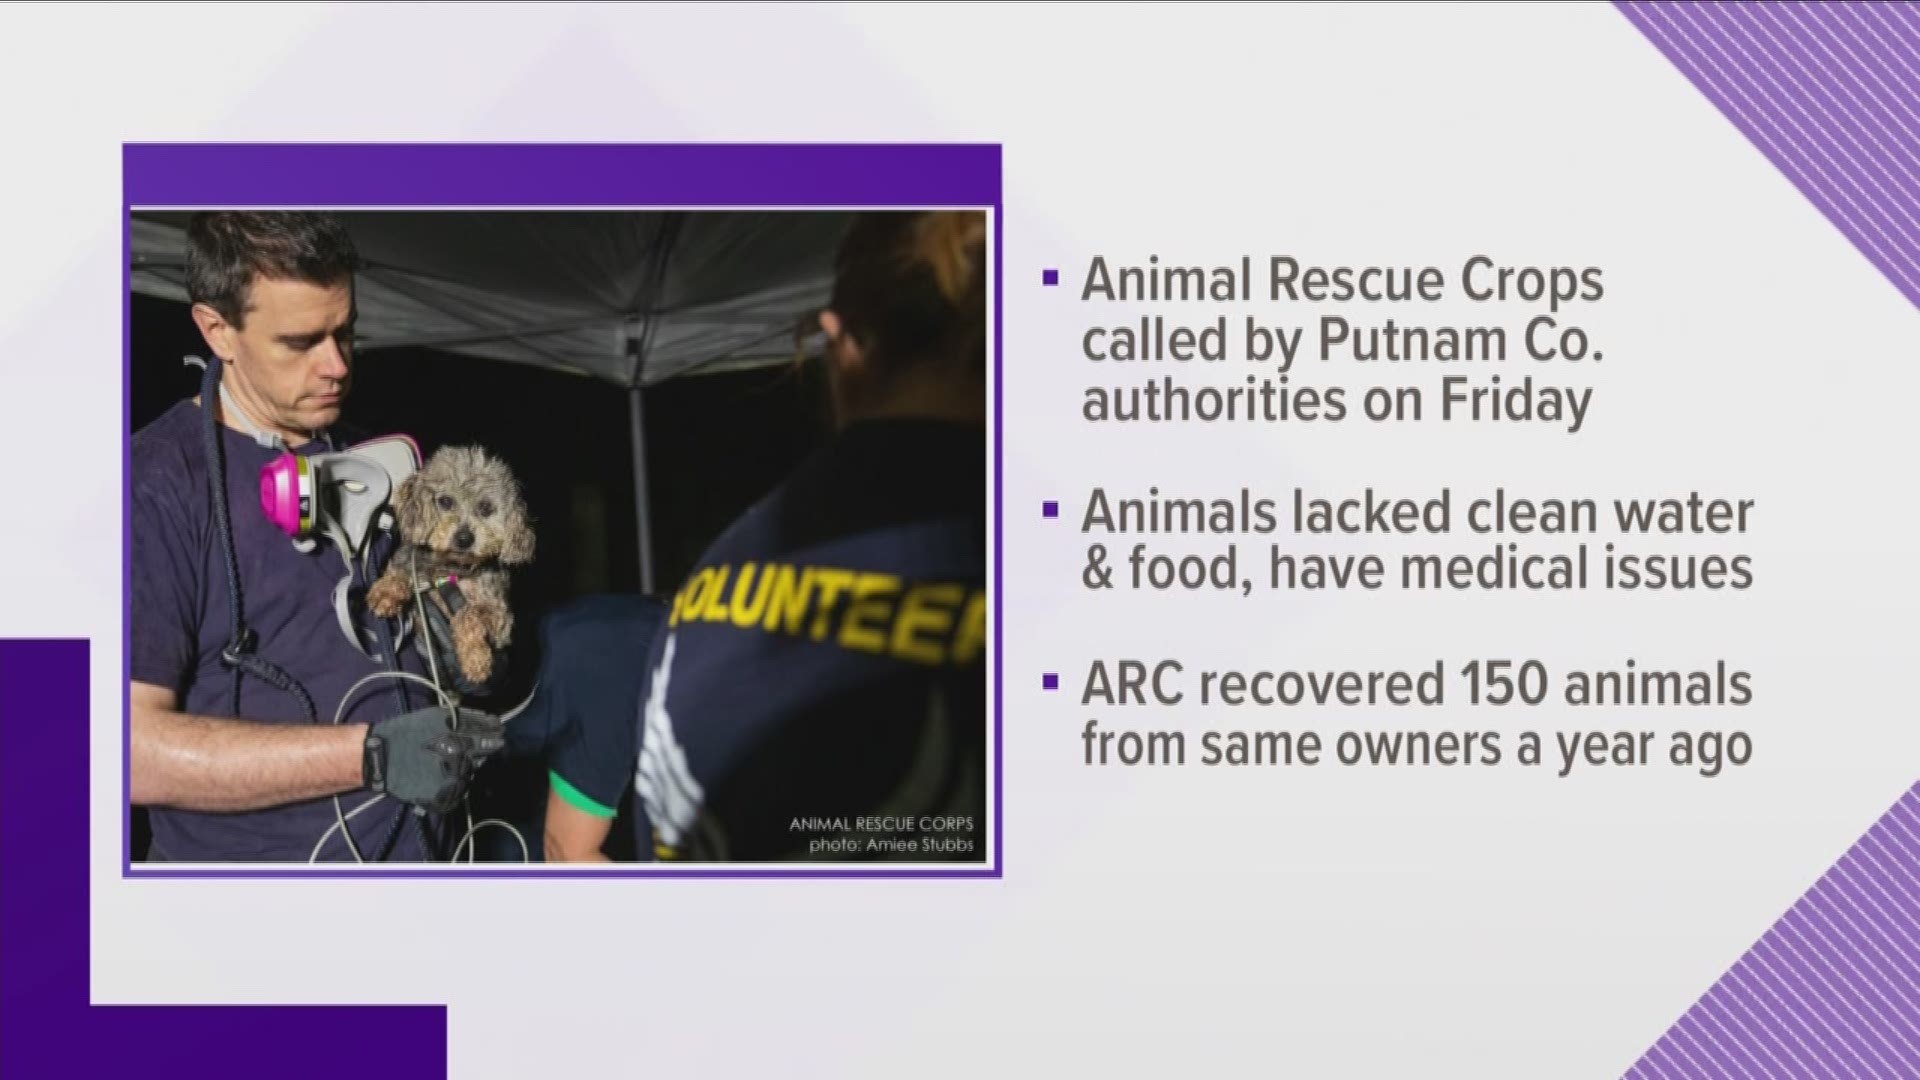 The Animal Rescue Corps (ARC), working with the Putnam County Sheriff's Office, rescued 23 dogs and 19 cats from the property this weekend. They said that none of the animals had access to drinkable water and little access to food.